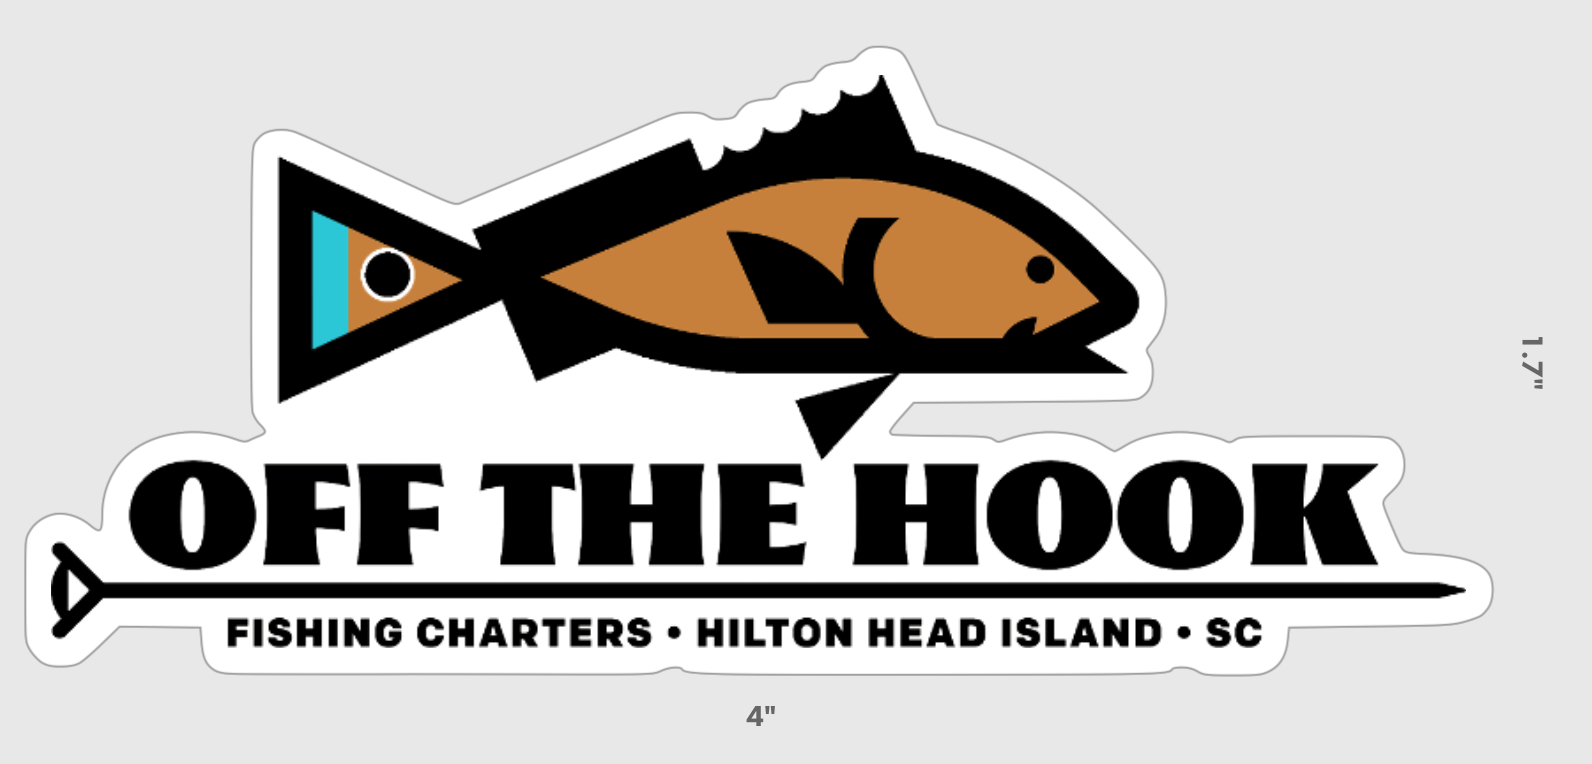 OFF THE HOOK FLY LOGO TRUCKER HAT - Off The Hook Fishing Charters